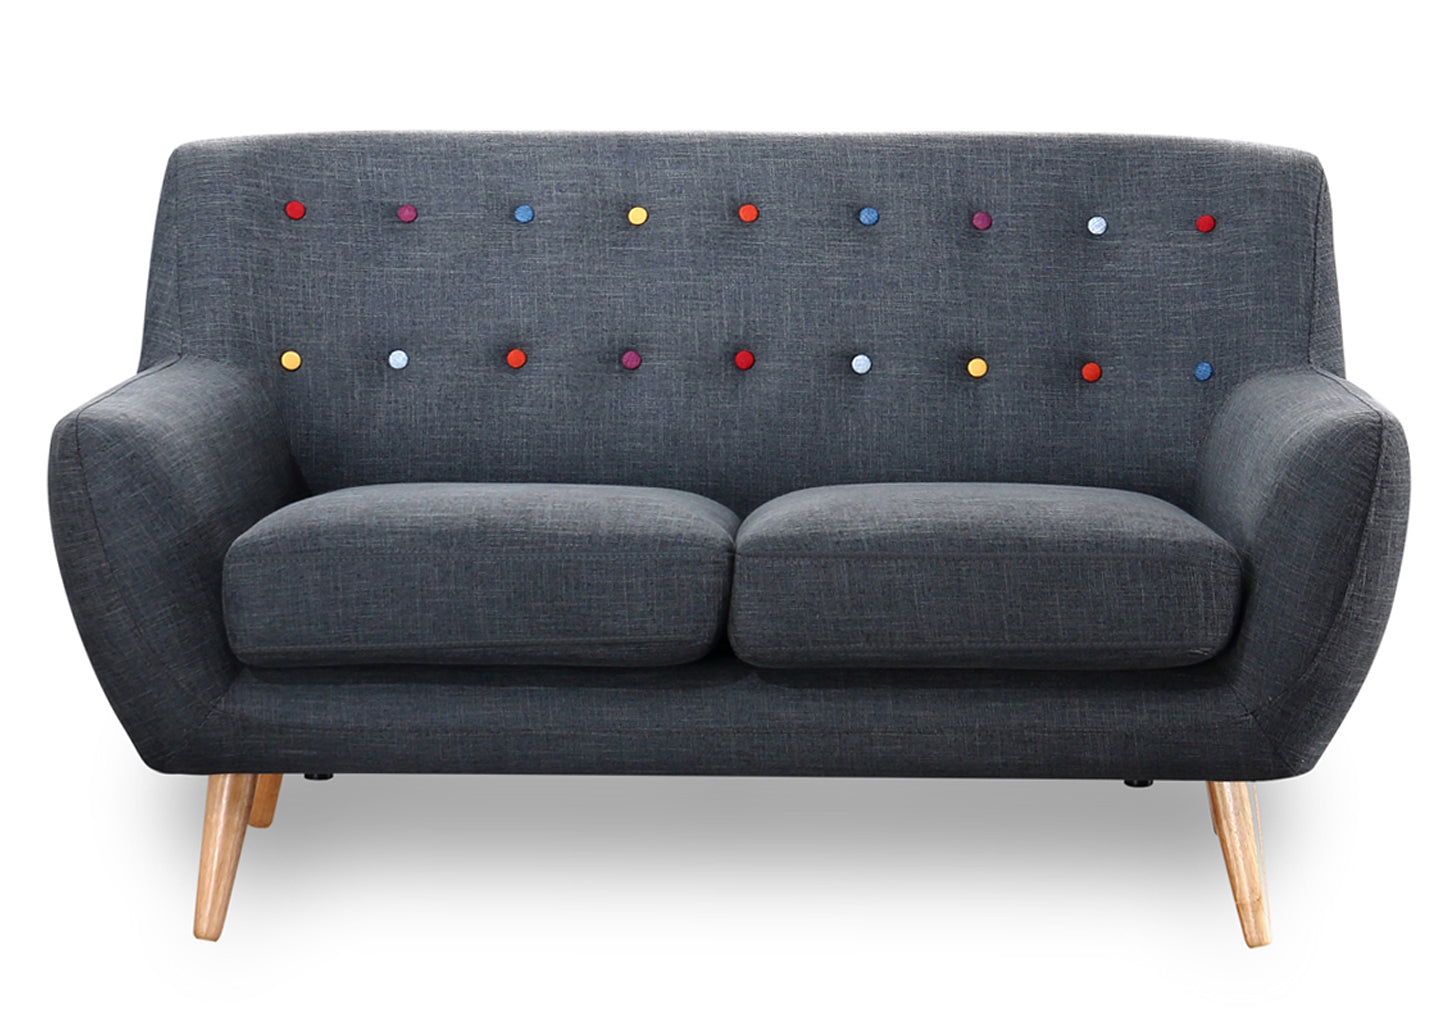 2 Seater Sofa in charcoal grey with rainbow buttons scandinavian style